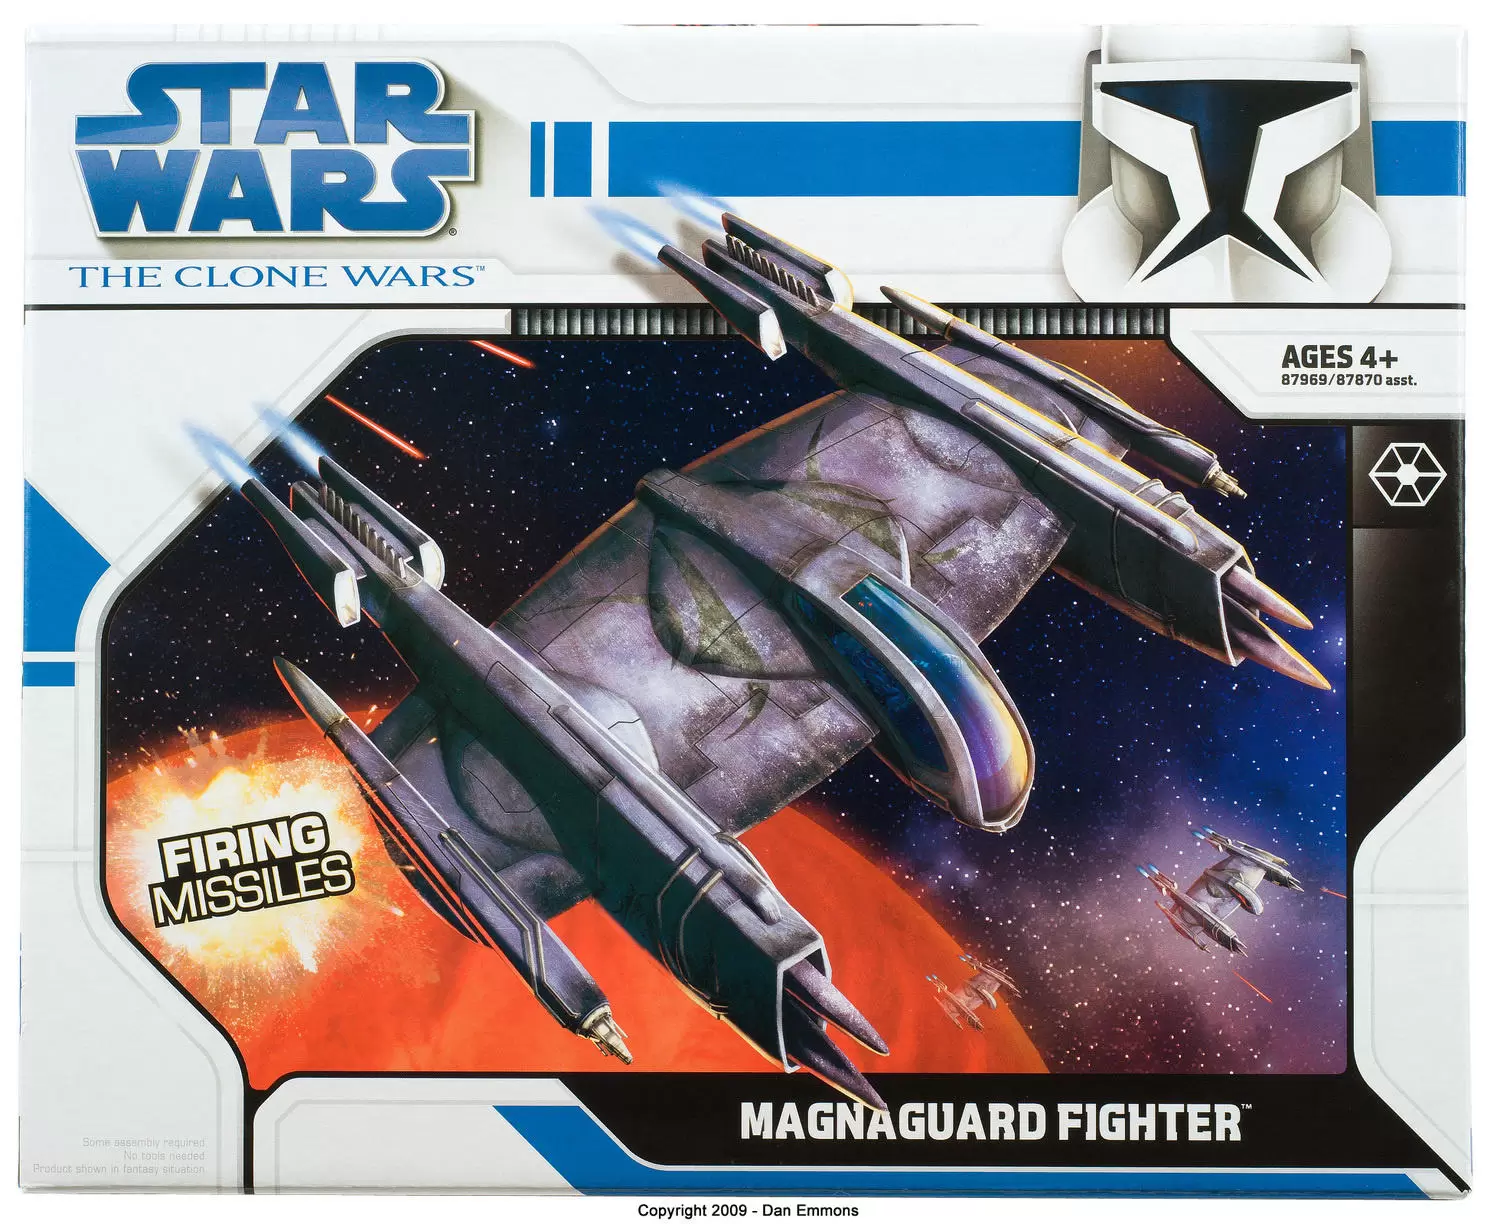 The Clone Wars (TCW 2008) - Magnaguard Fighter